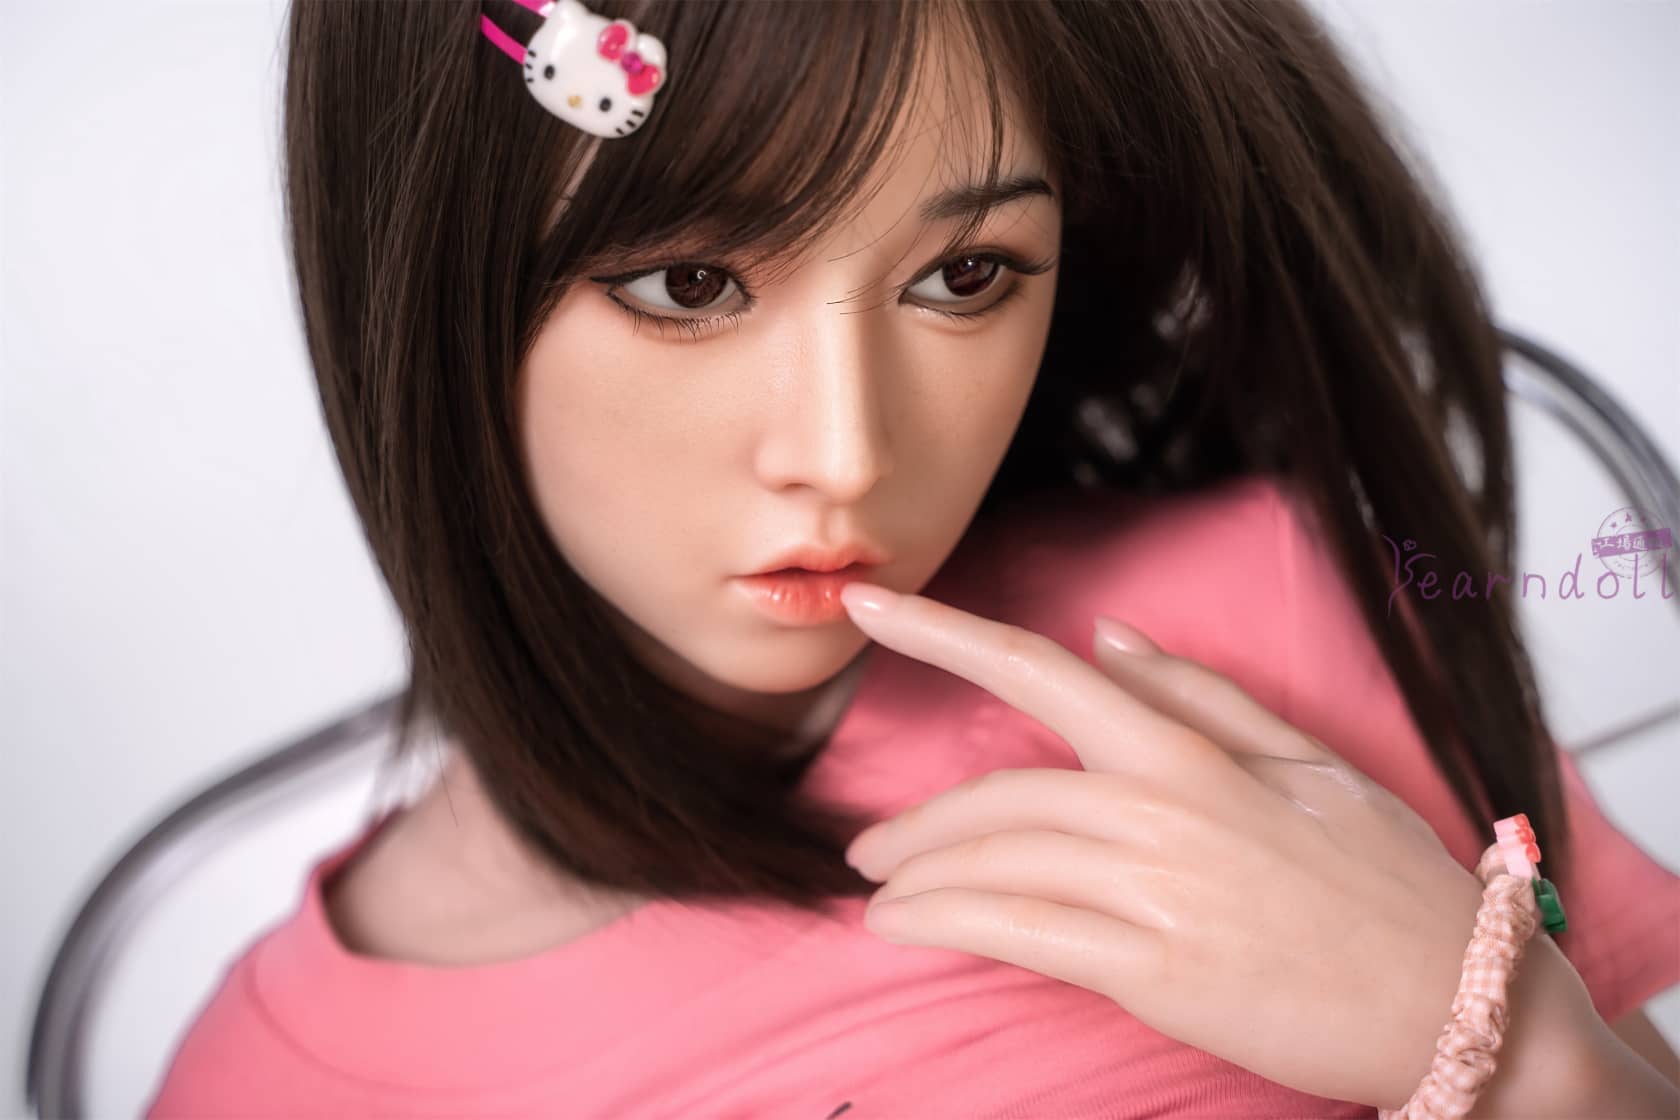 Valuta giapponese Yearndoll 158 cm Masako H Cup Y208 Silicone pieno